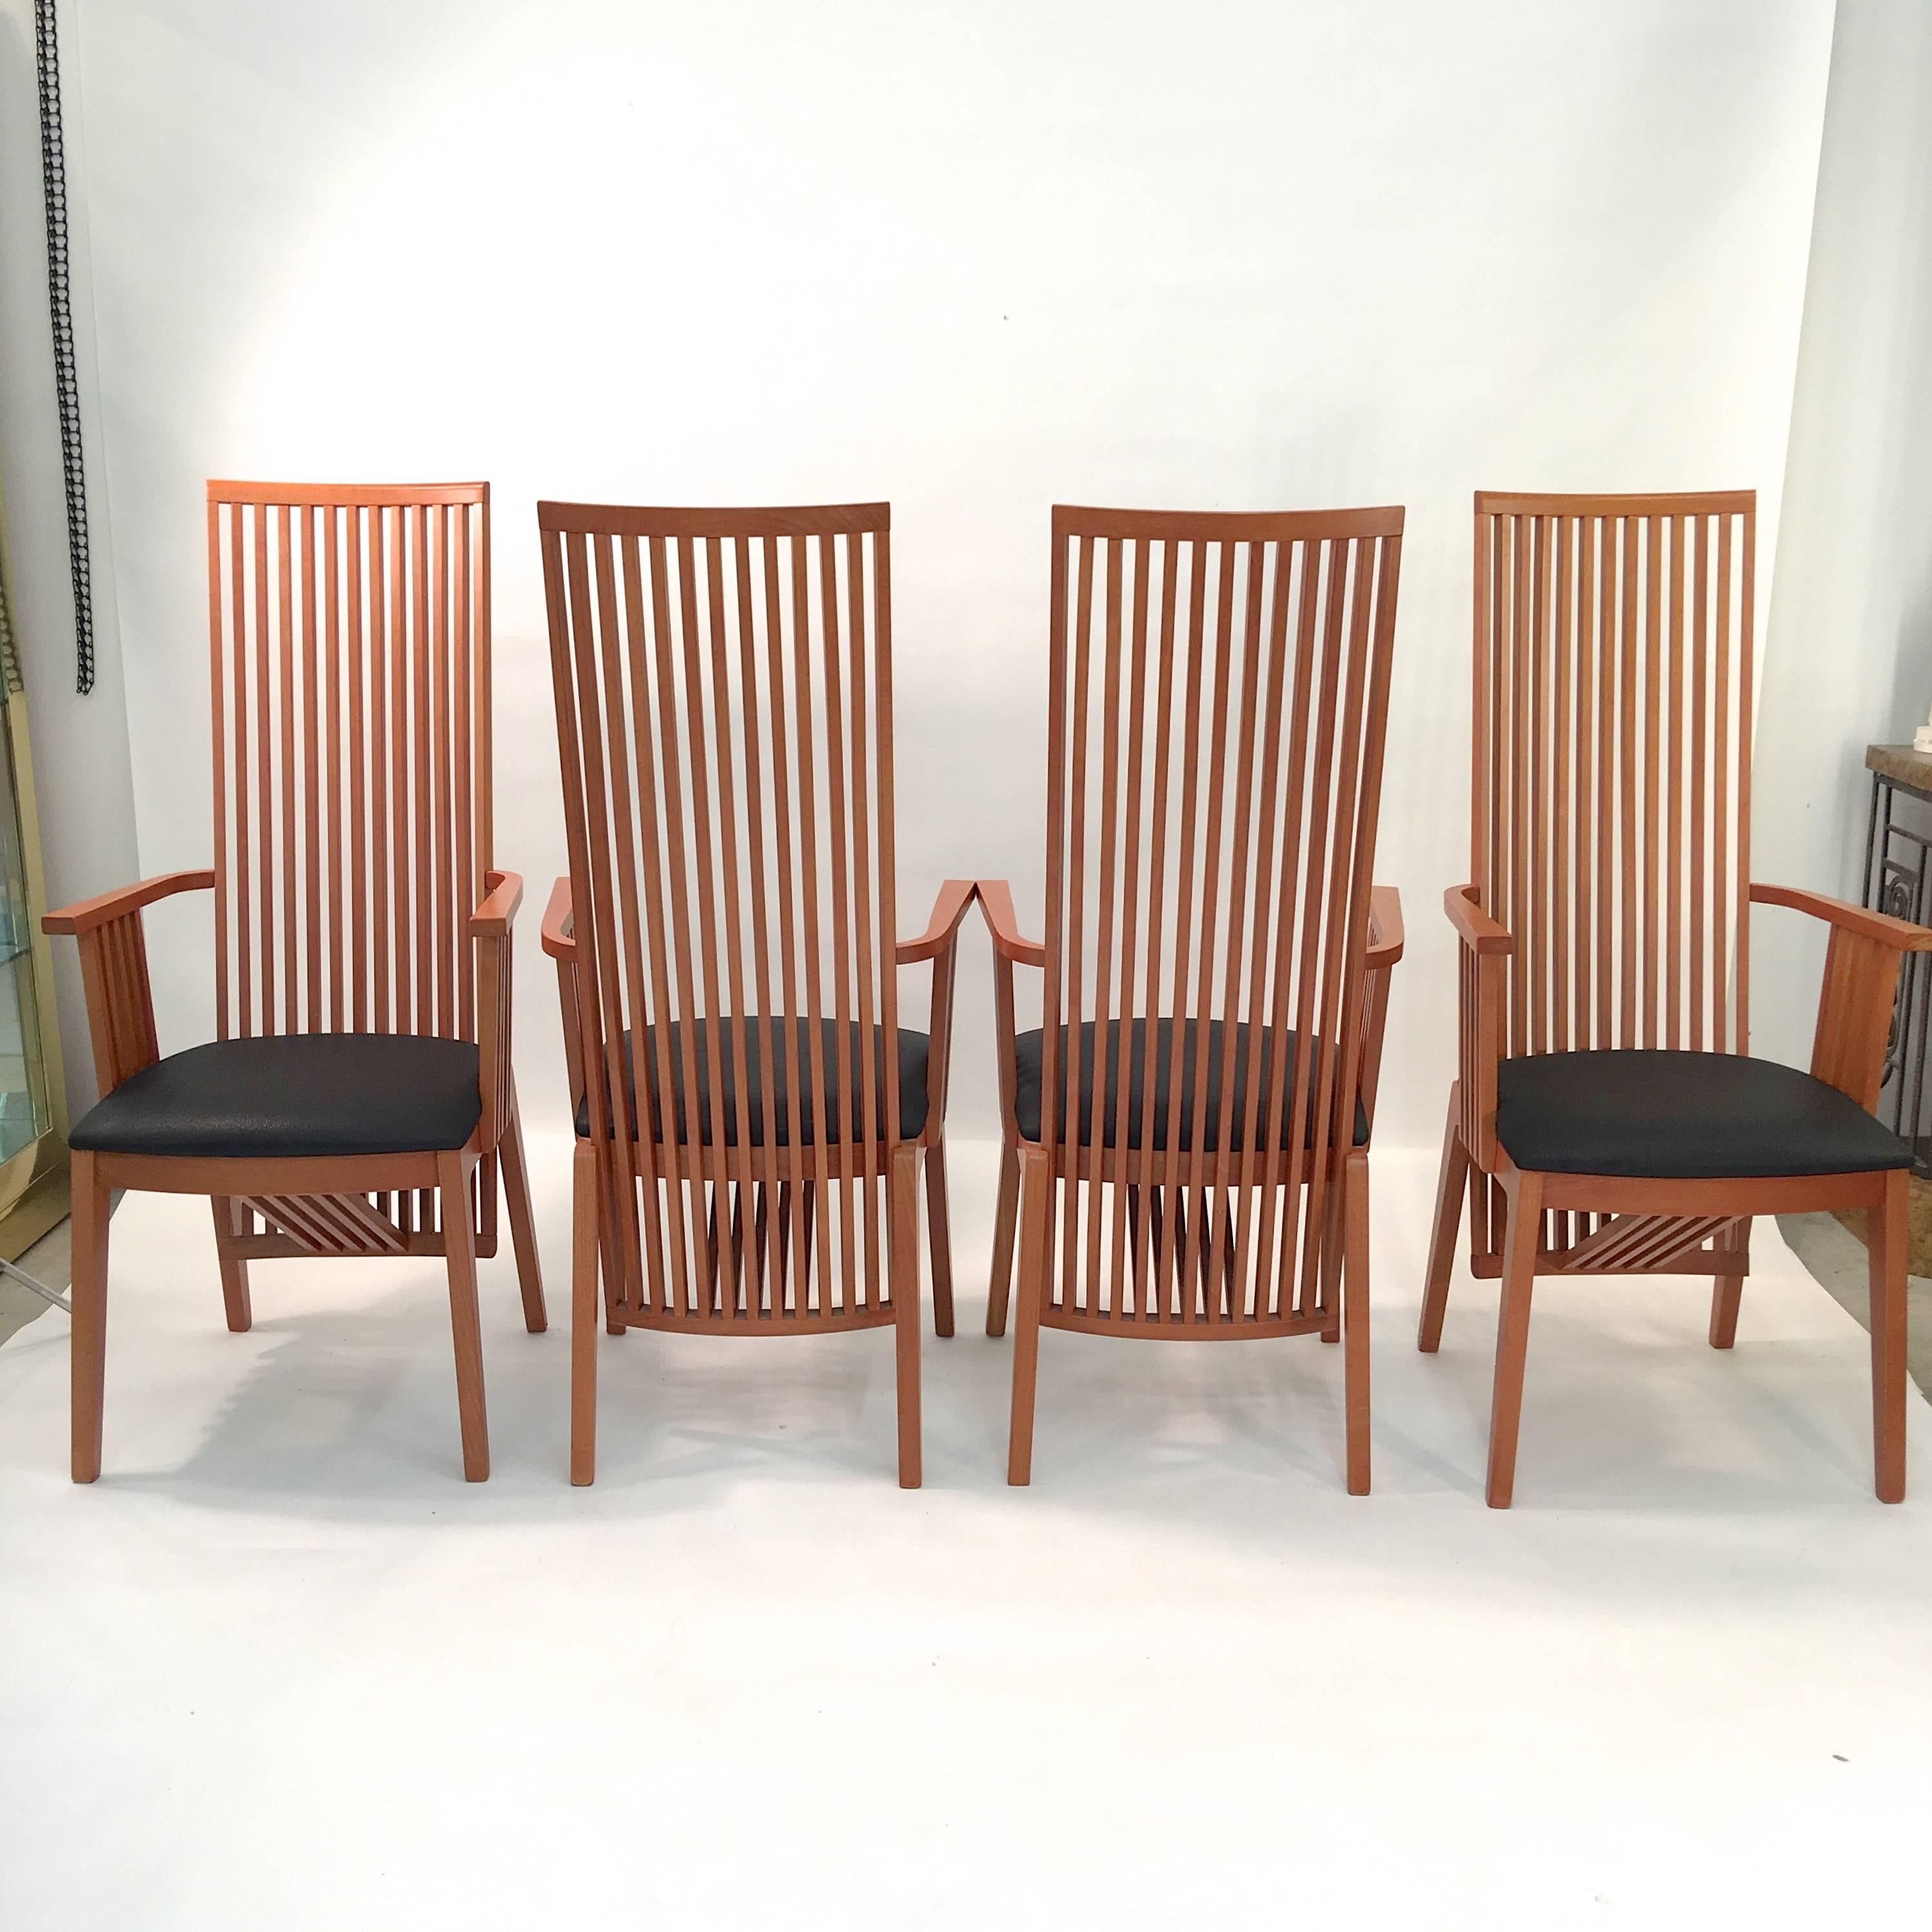 Set of four dining armchairs in the style of Frank Lloyd Wright by A. Sibau produced in Manzano, Italy

Made of beechwood with cherry finish with black leather seats.

Pristine condition.
